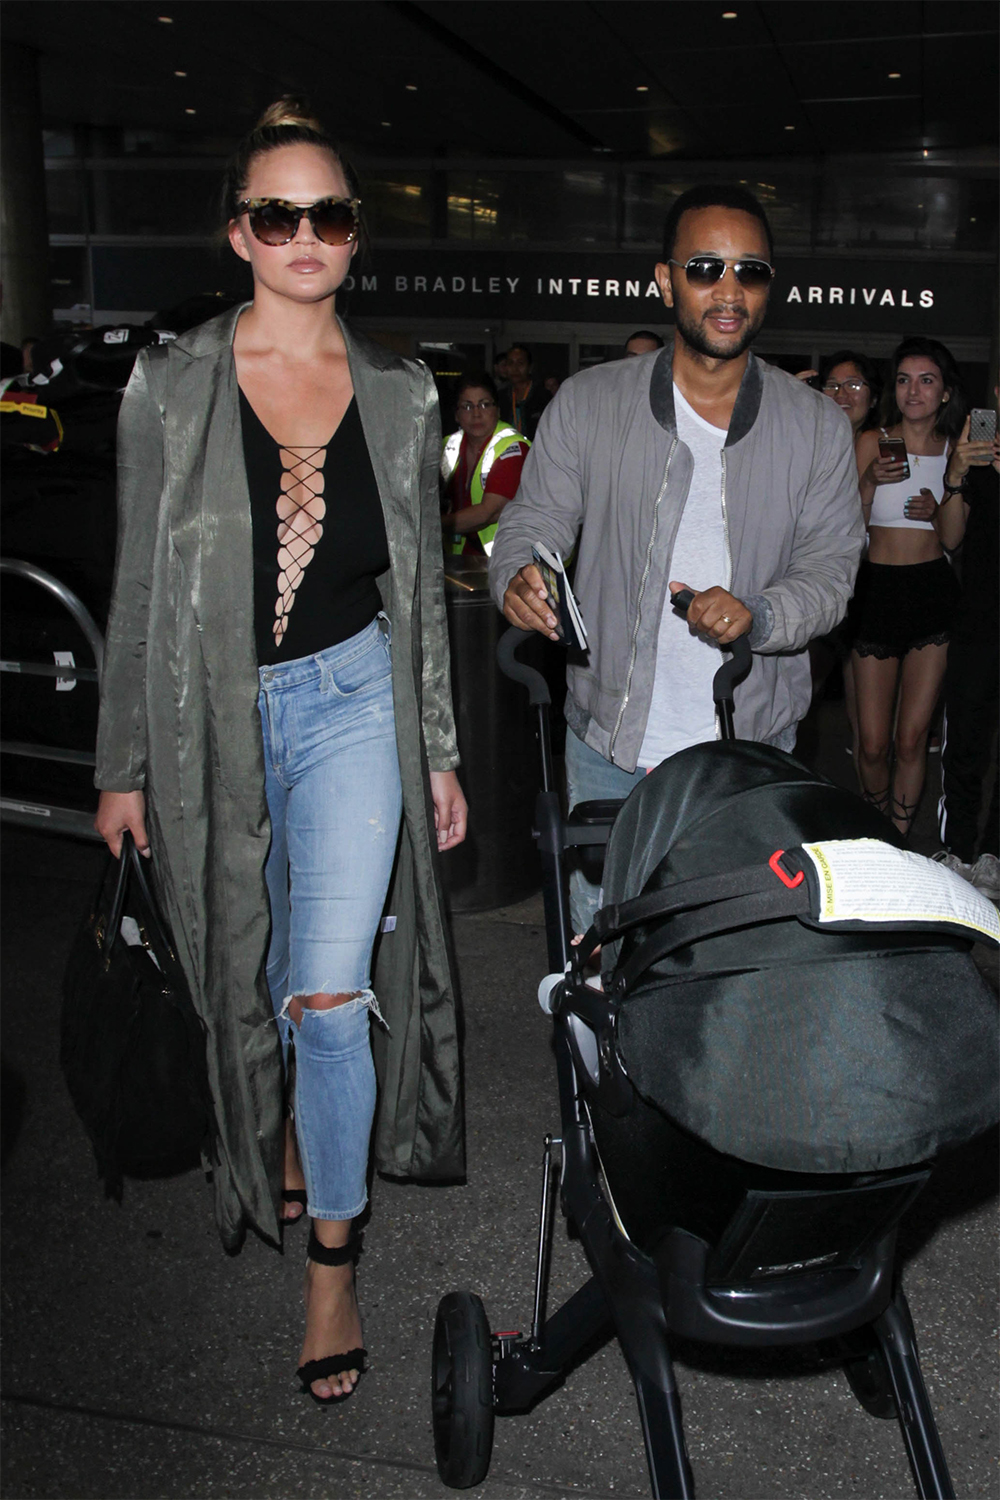 Chrissy Teigen and John Legend are seen at LAX.